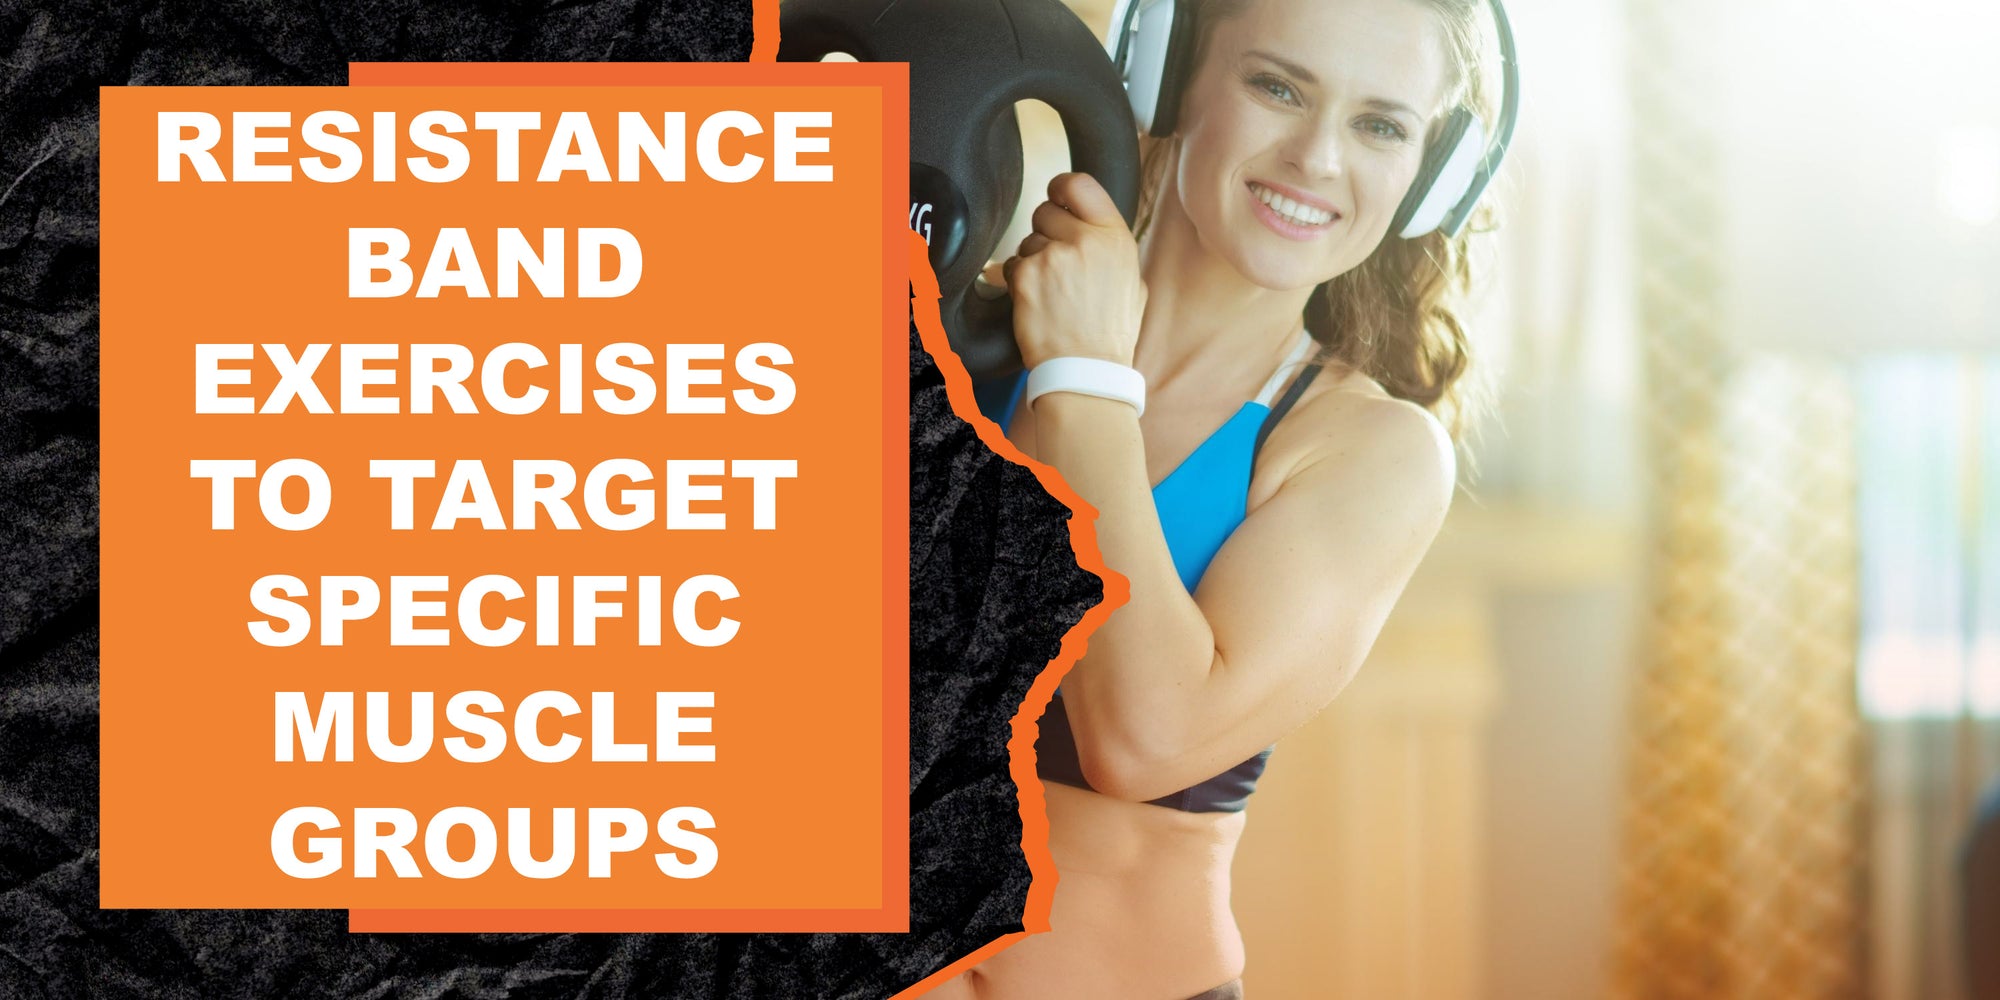 Resistance Band Exercises to Target Specific Muscle Groups